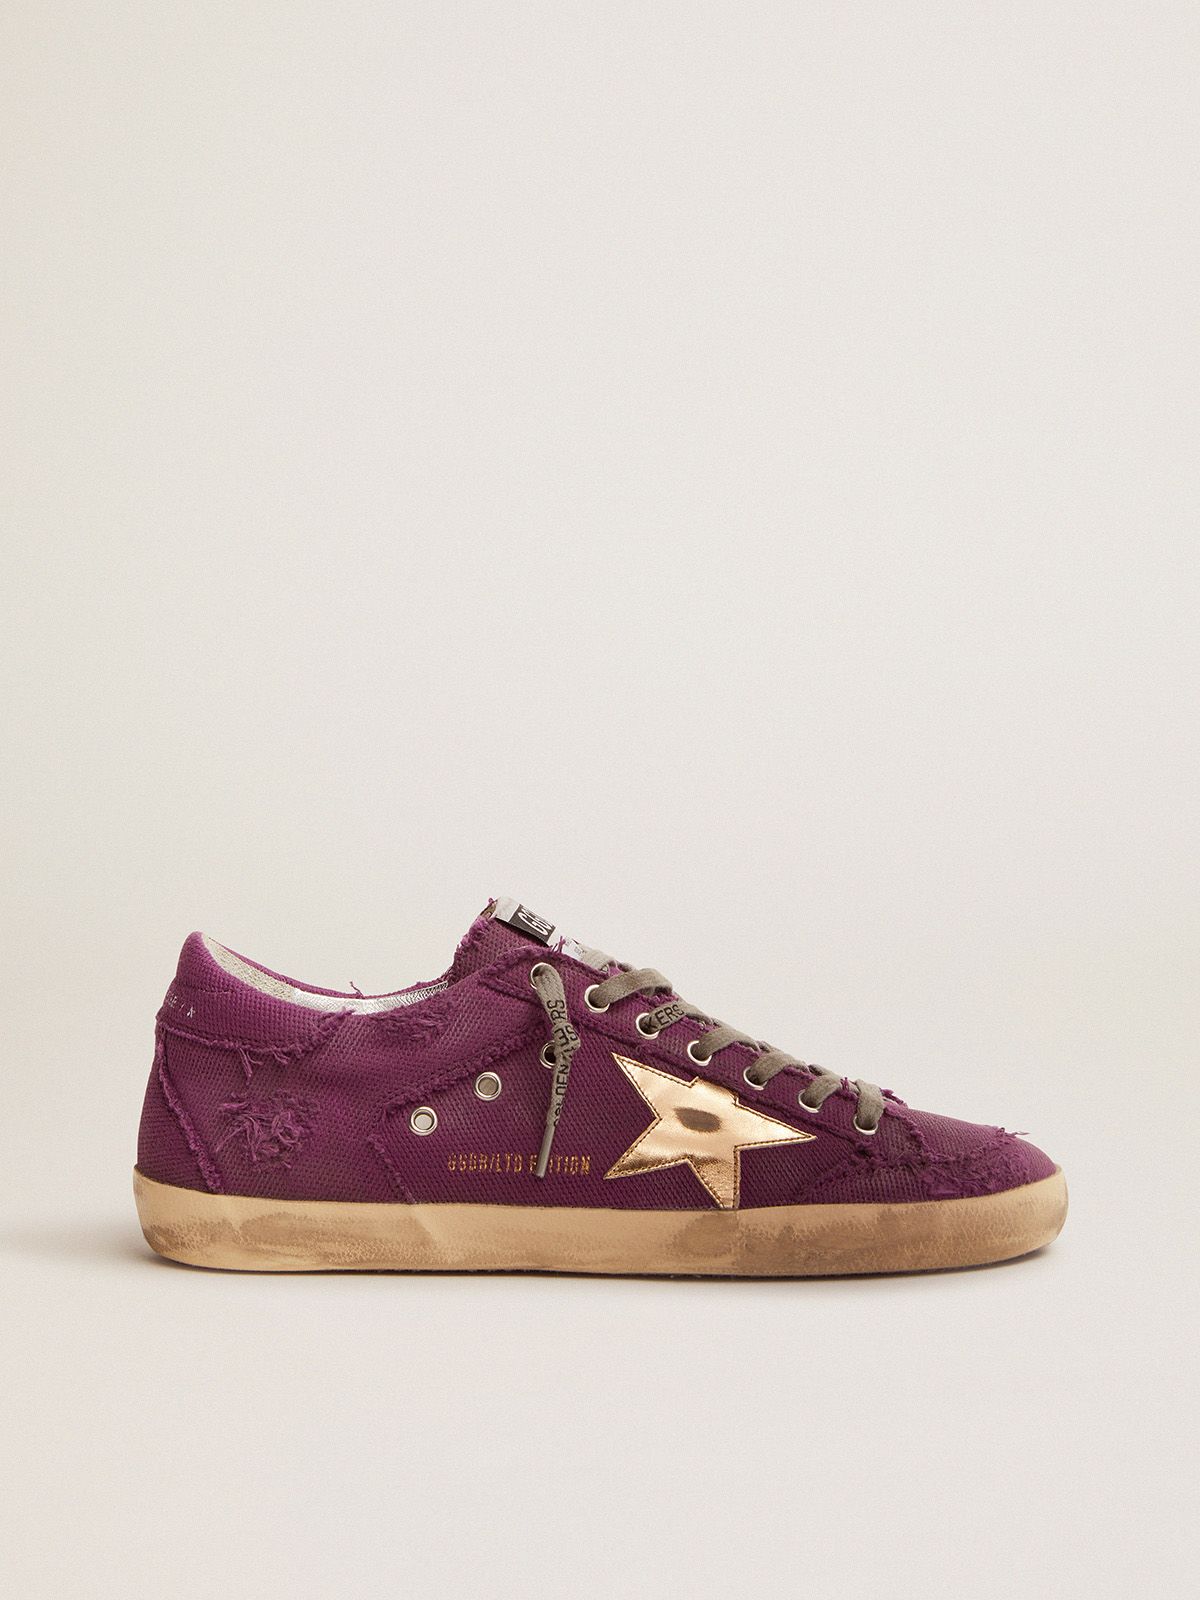 golden goose gold LAB sneakers Super-Star leather in distressed star Penstar canvas purple laminated with